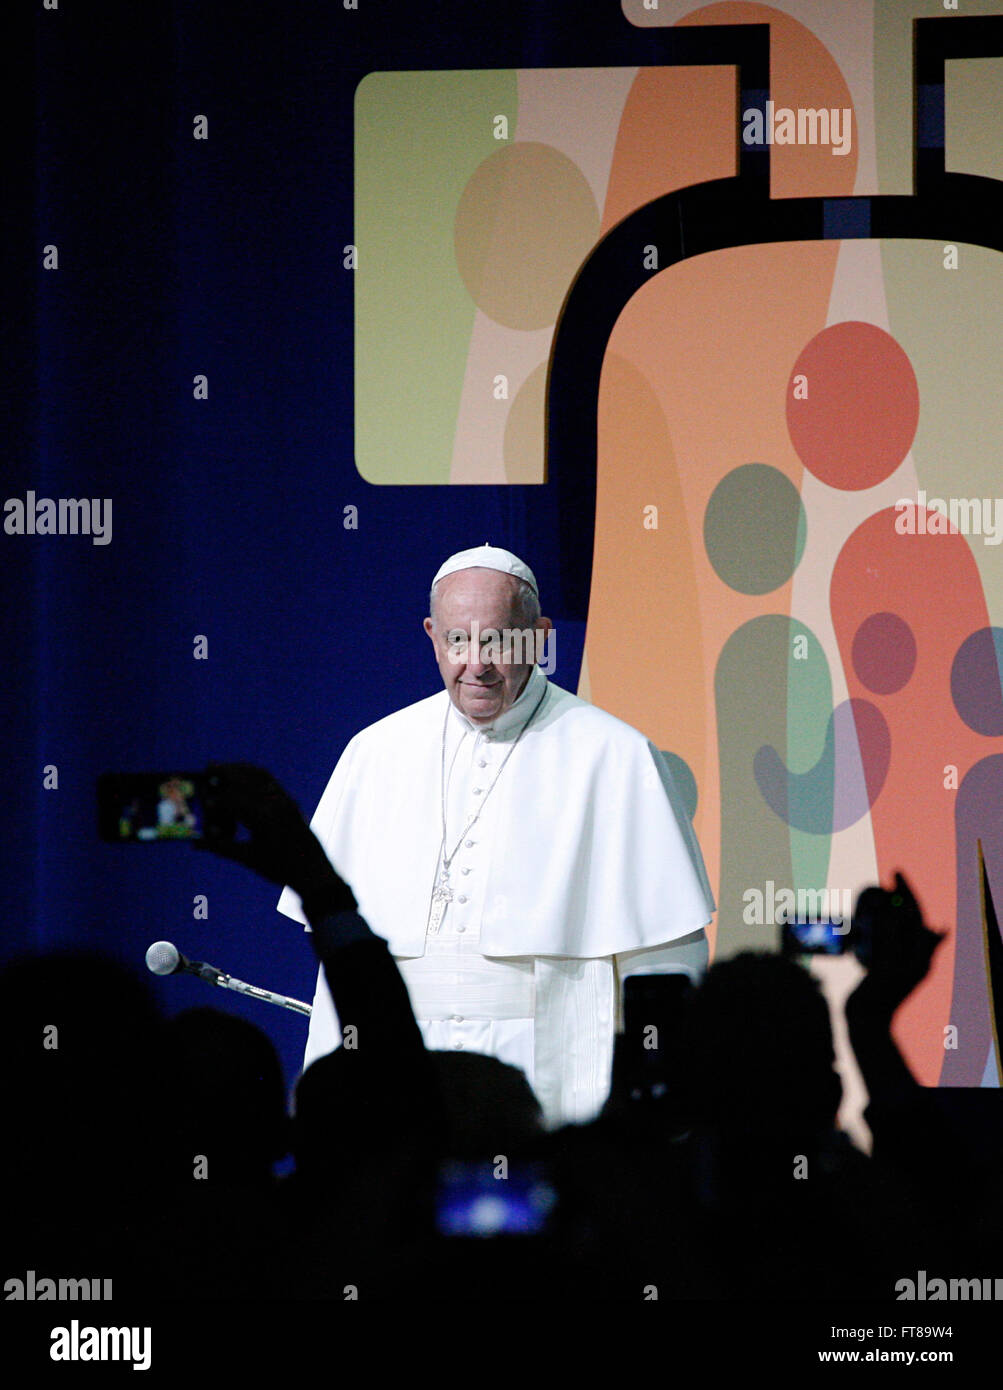 Pope Francis addresses VIPs during his departure ceremony at Philadelphia International Airport September 27, 2015 following his weeklong visit to the United States. U.S. Customs and Border Protection (CBP) contributed to papal security in Washington, D.C., New York City and Philadelphia. (CBP Photo/Steve Sapp) Stock Photo